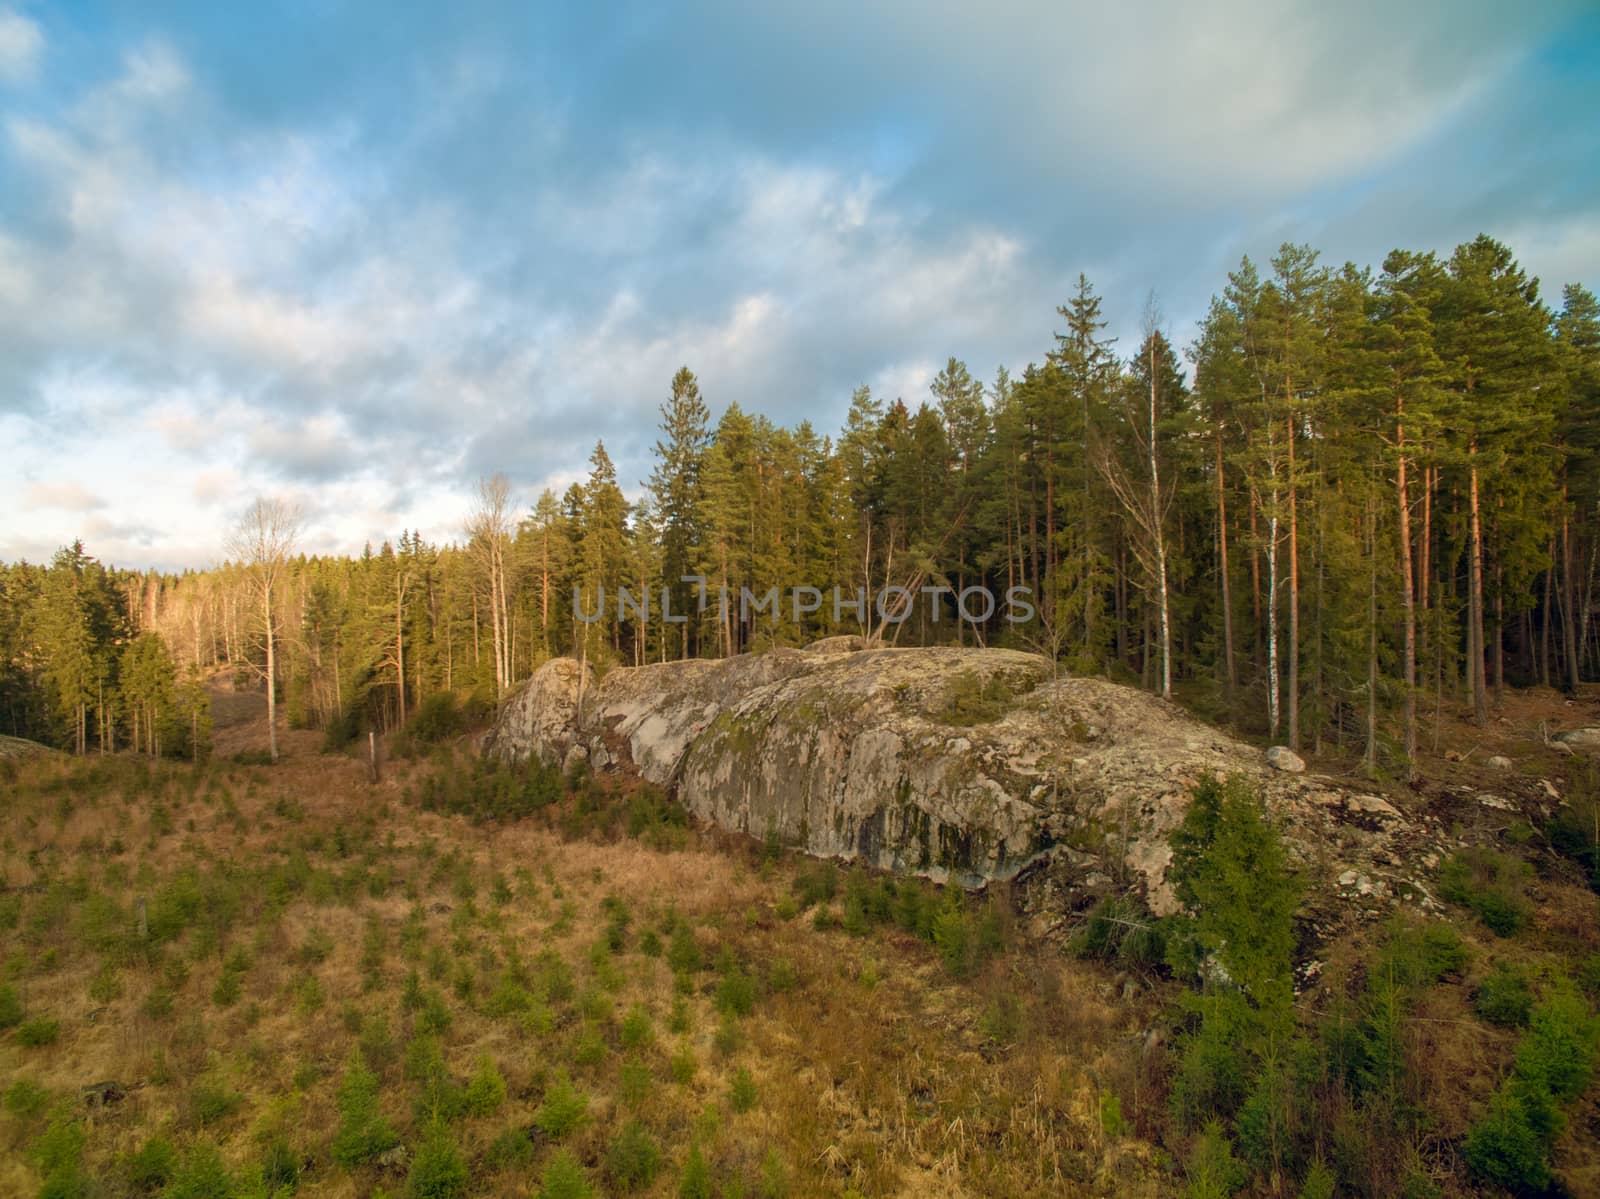 Large rock in the woods by thomas_males